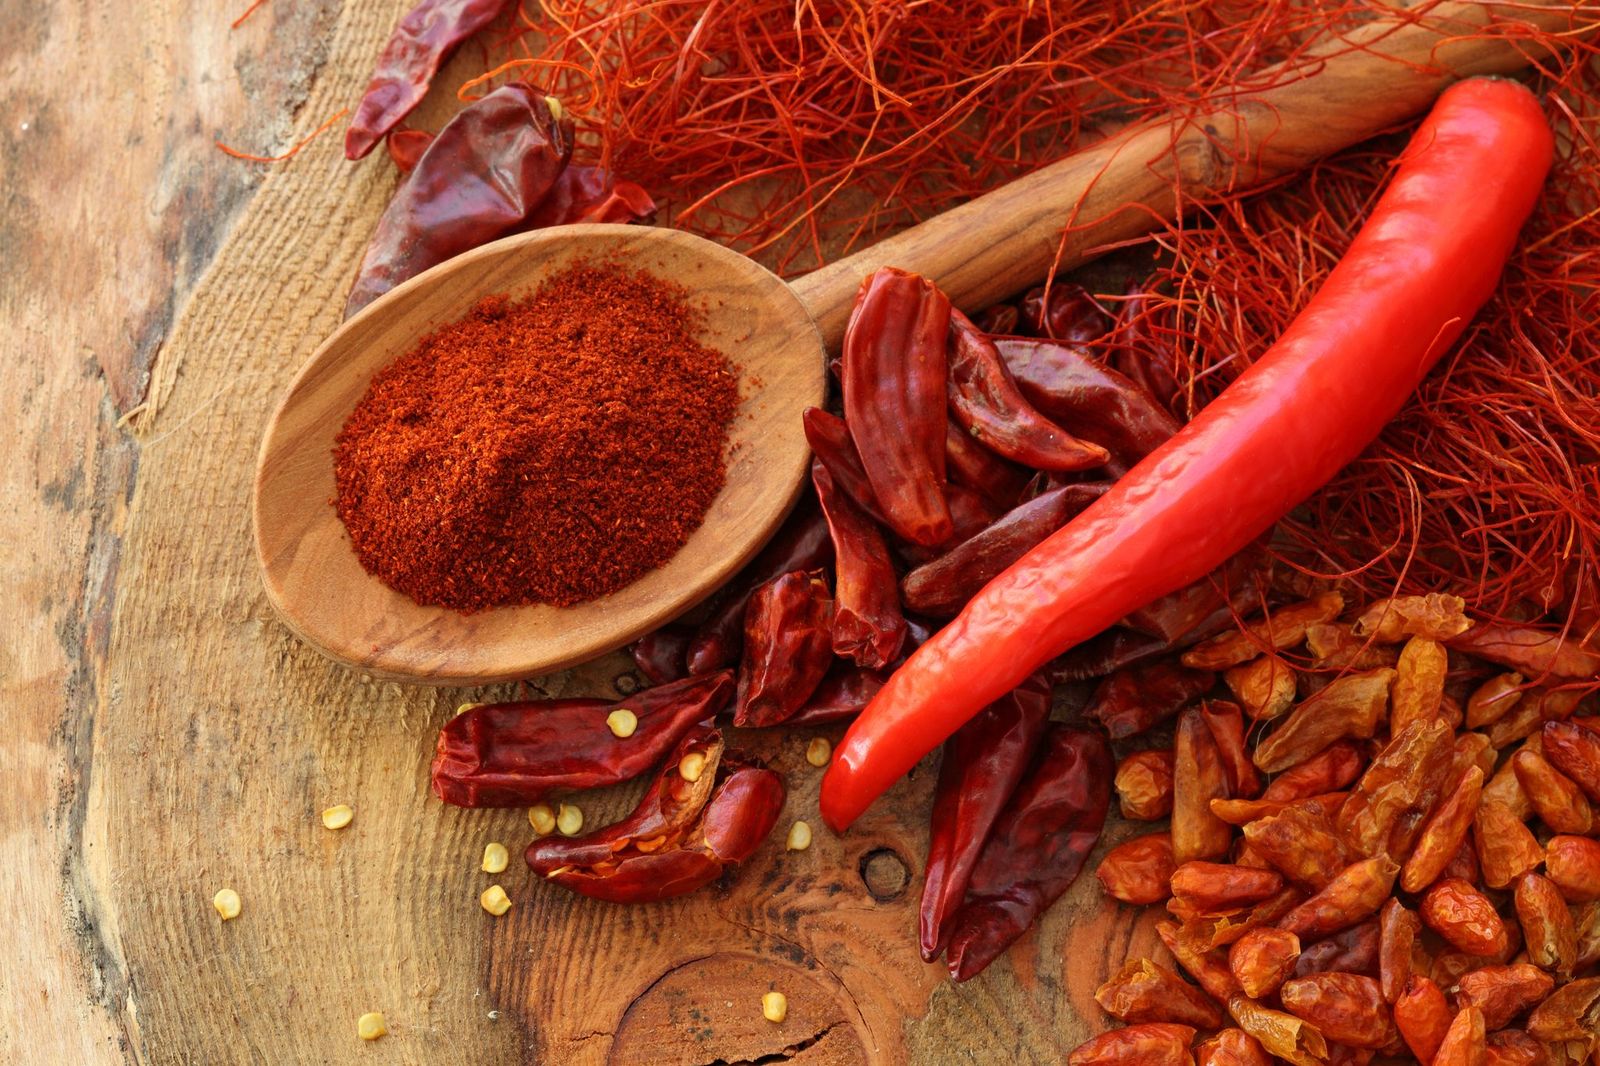 Eating Chili Pepper May Help You Live Longer!